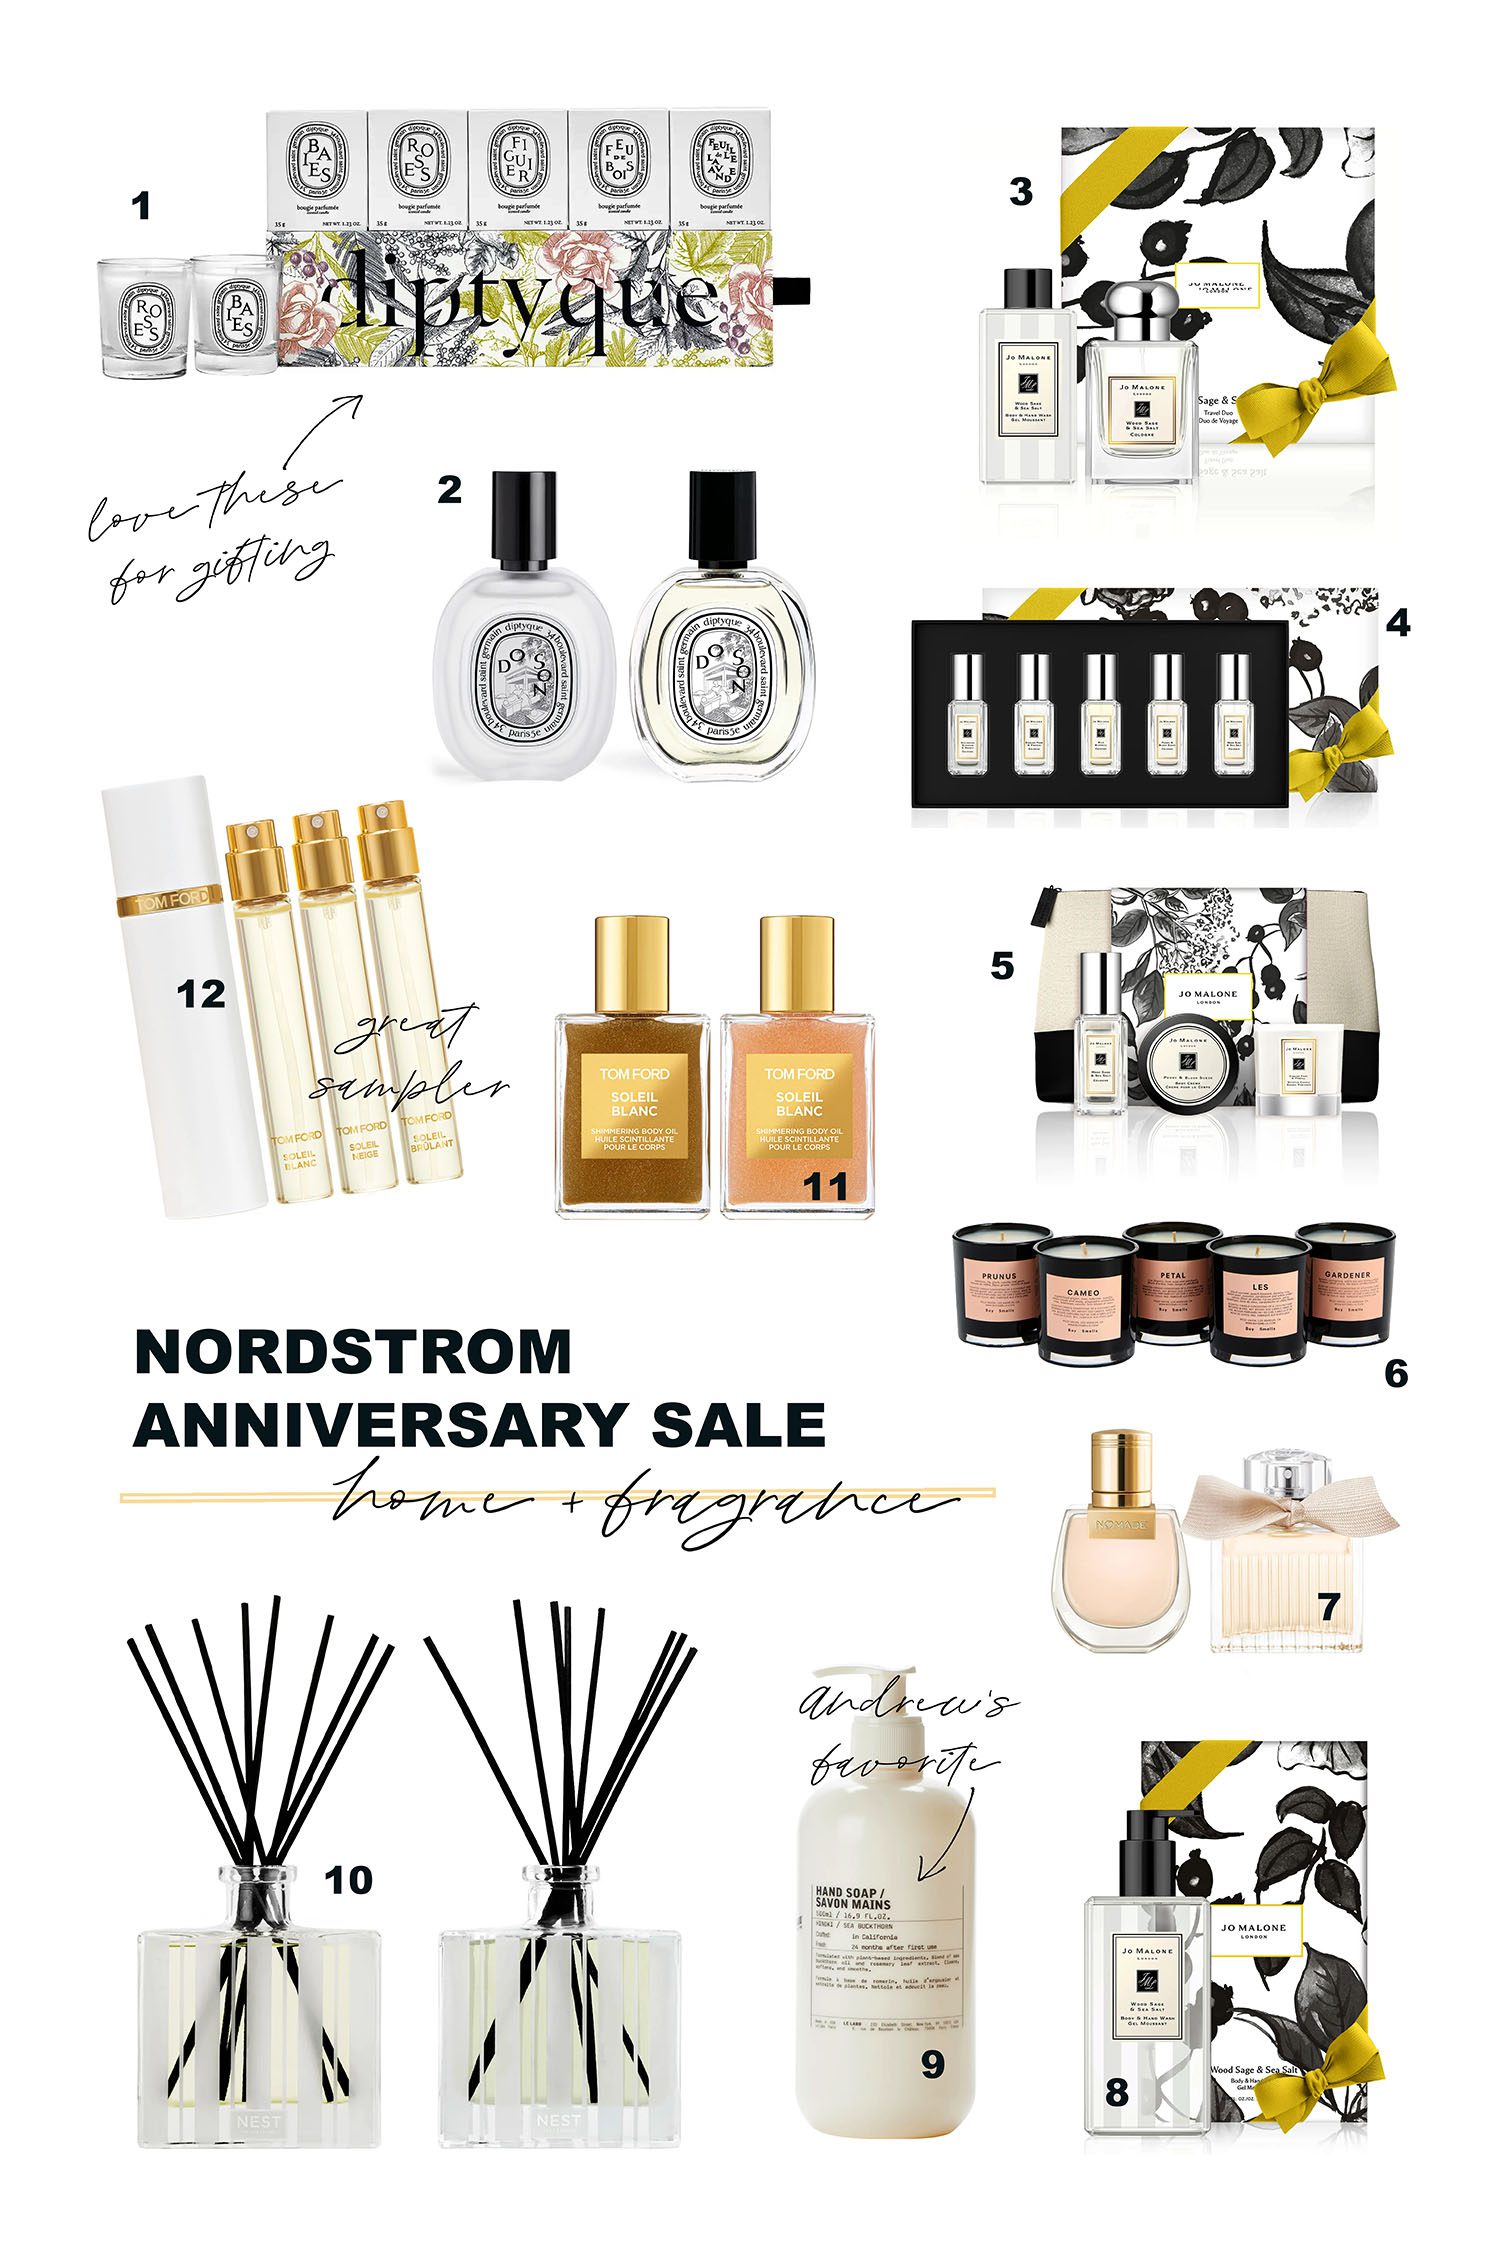 16 Barbiecore products on sale during the Nordstrom 'Anniversary